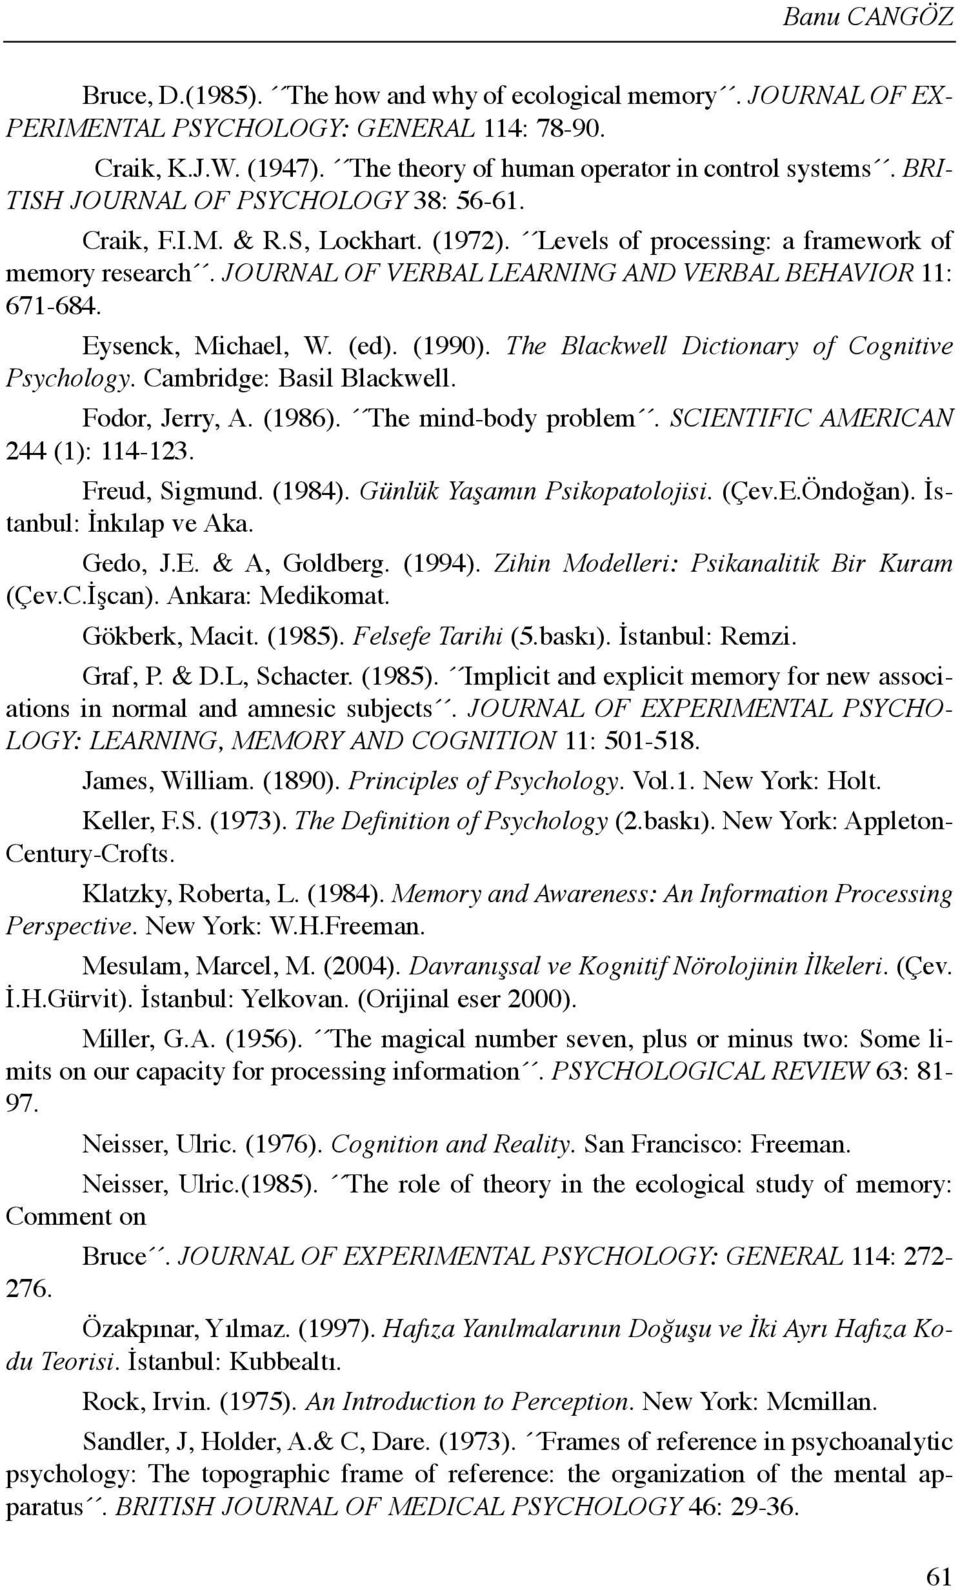 Eysenck, Michael, W. (ed). (1990). The Blackwell Dictionary of Cognitive Psychology. Cambridge: Basil Blackwell. Fodor, Jerry, A. (1986). The mind-body problem. SCIENTIFIC AMERICAN 244 (1): 114-123.